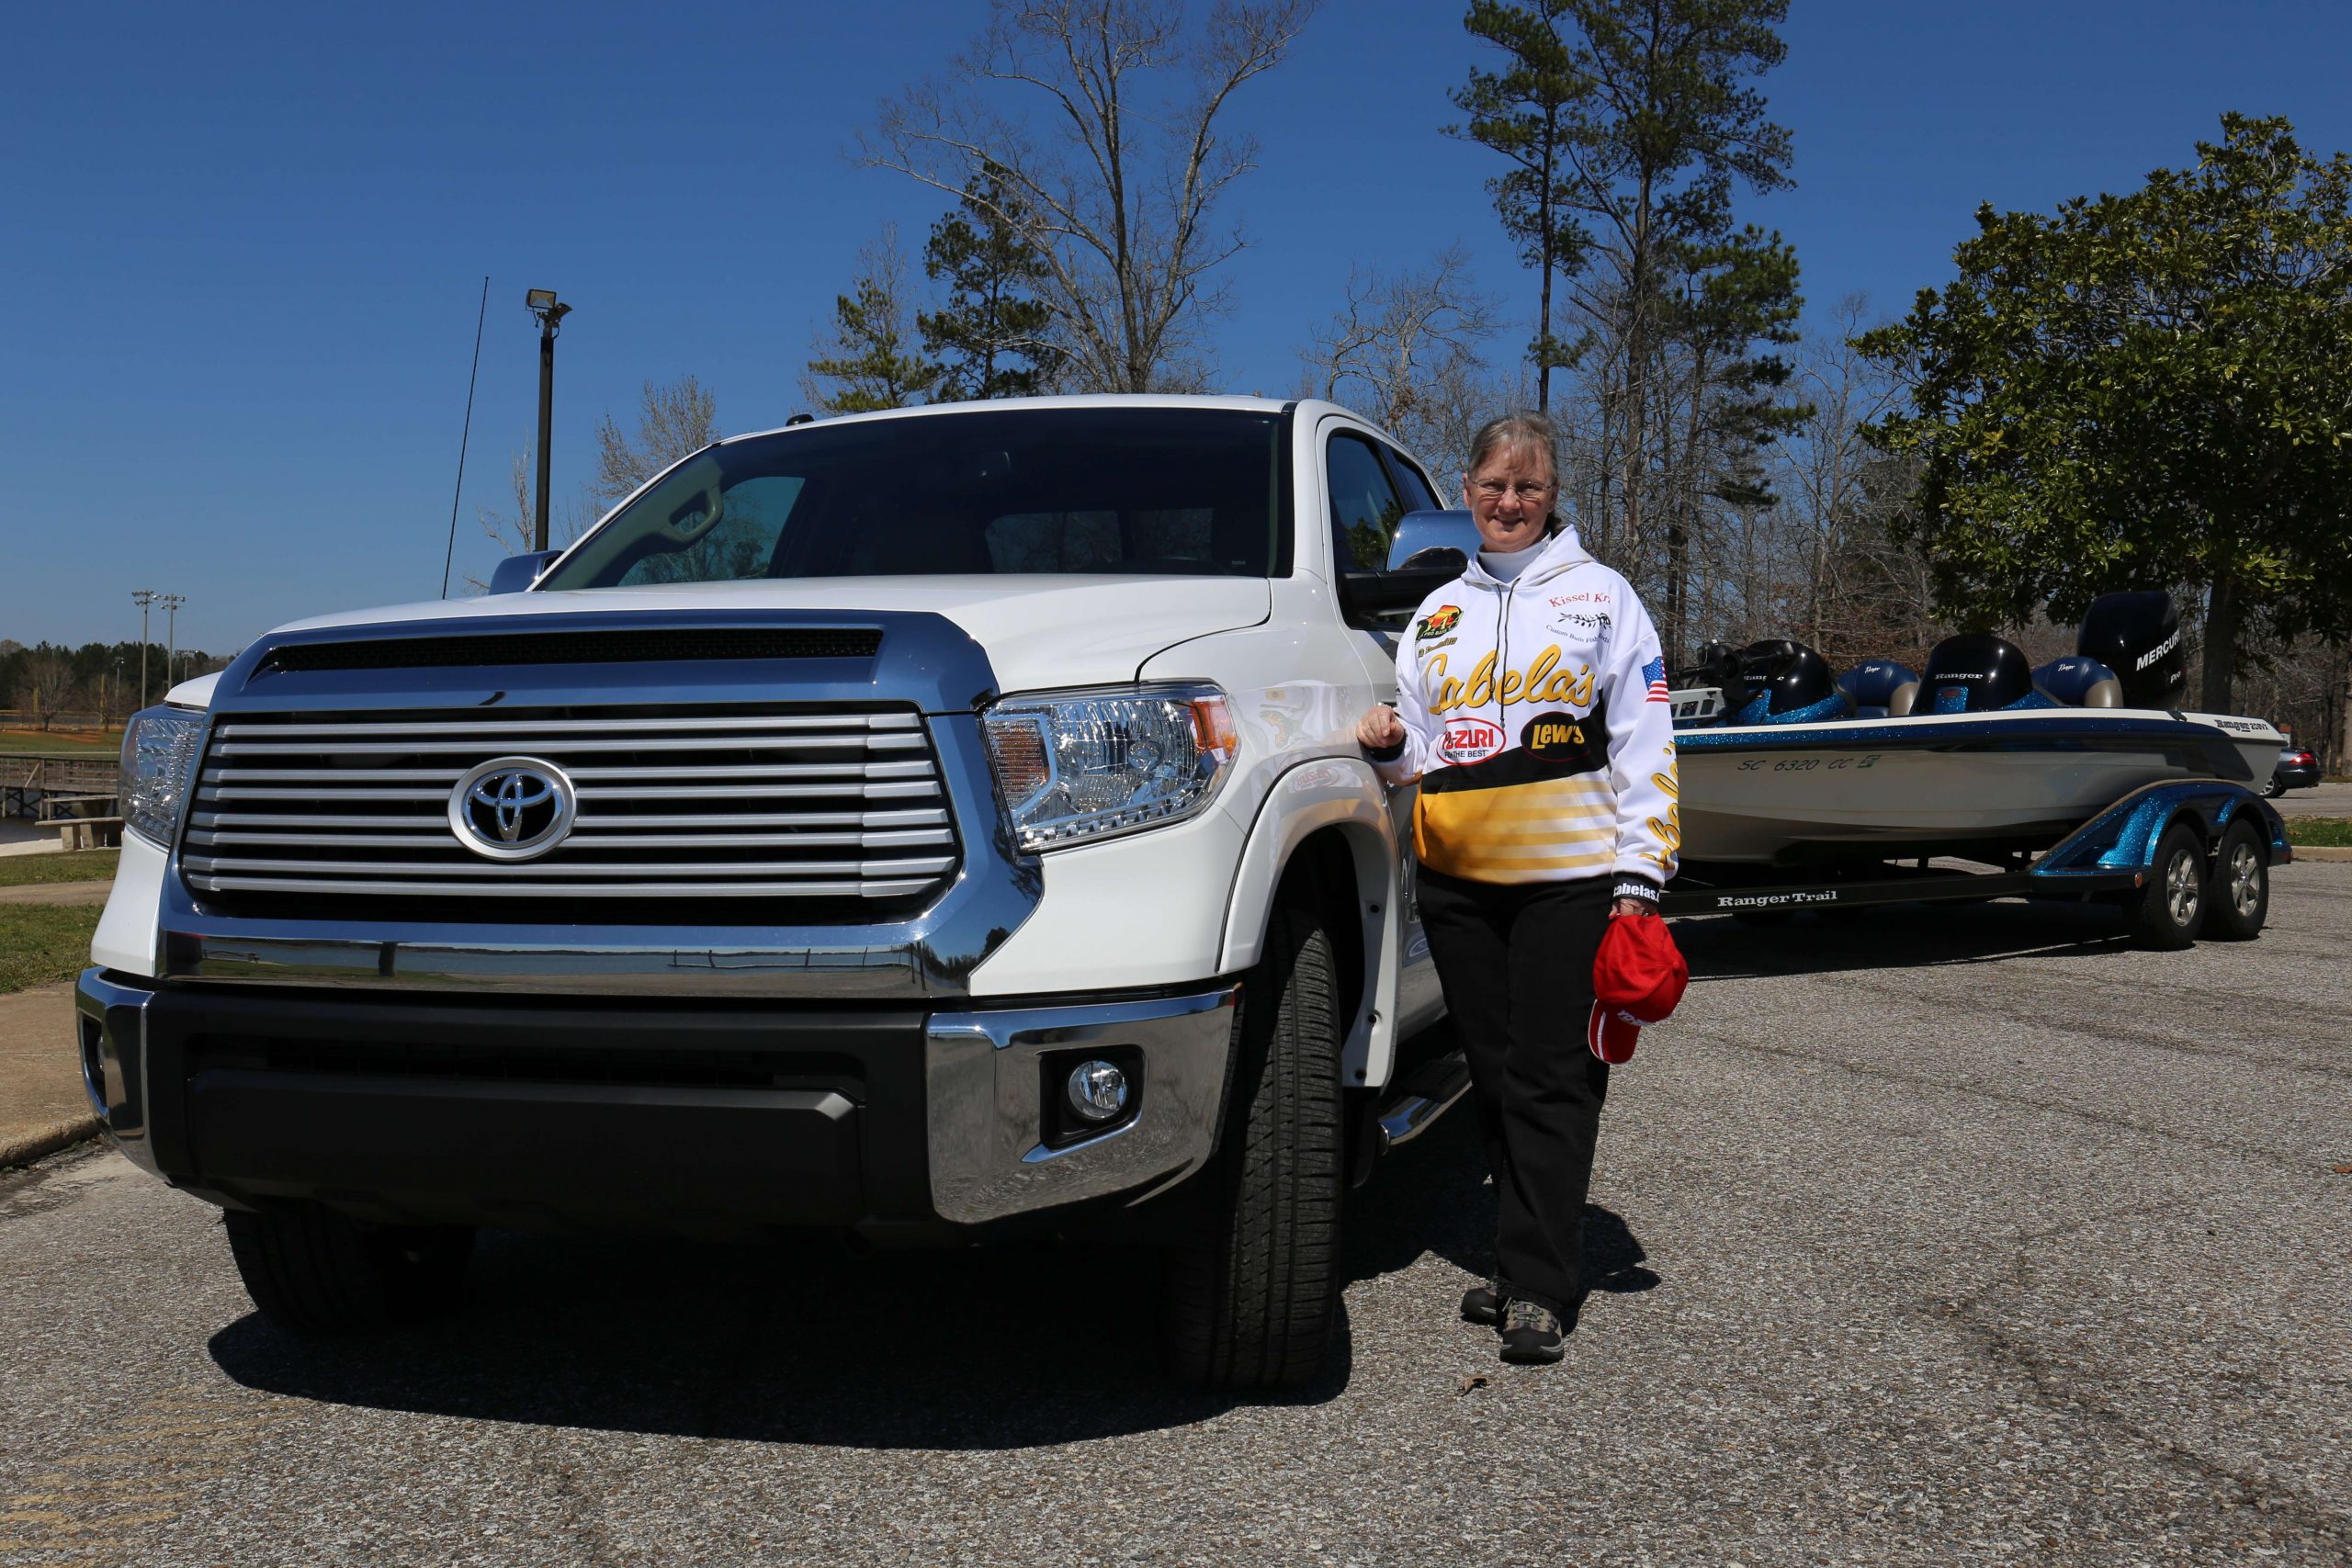 Meet Martha Goodfellow. Her husband introduced her to fishing about 25 years ago, and after gaining confidence fishing with him, she branched out to lady and team tournament trails. Martha's been competing in the Lady Bass Anglers Association Women's Pro Bass Tour since 2011, and she's won multiple Toyota Bonus Bucks awards while fishing LBAA. 